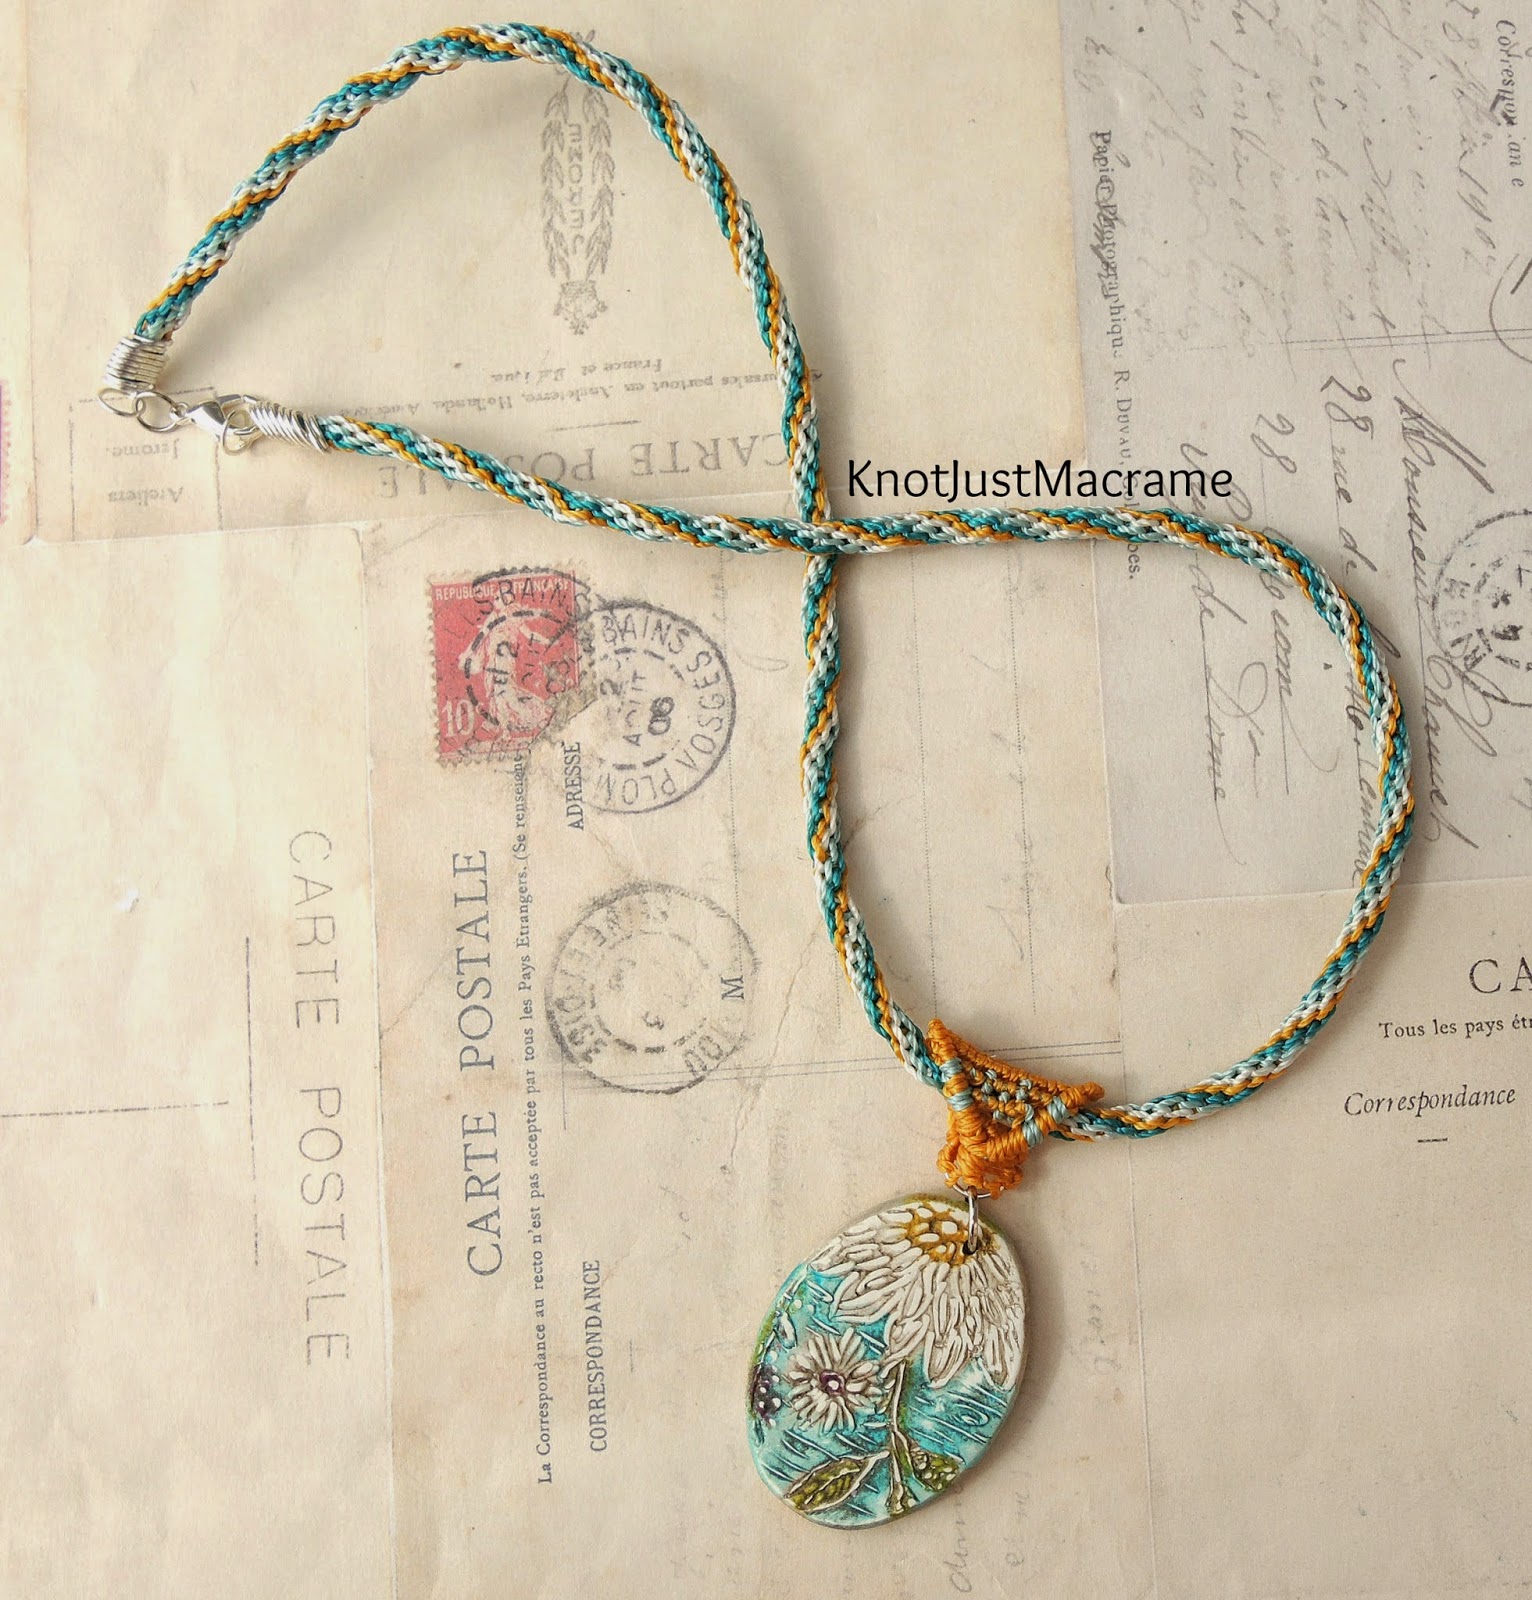 Knotted micro macrame necklace with daisy pendant in teal and mustard.